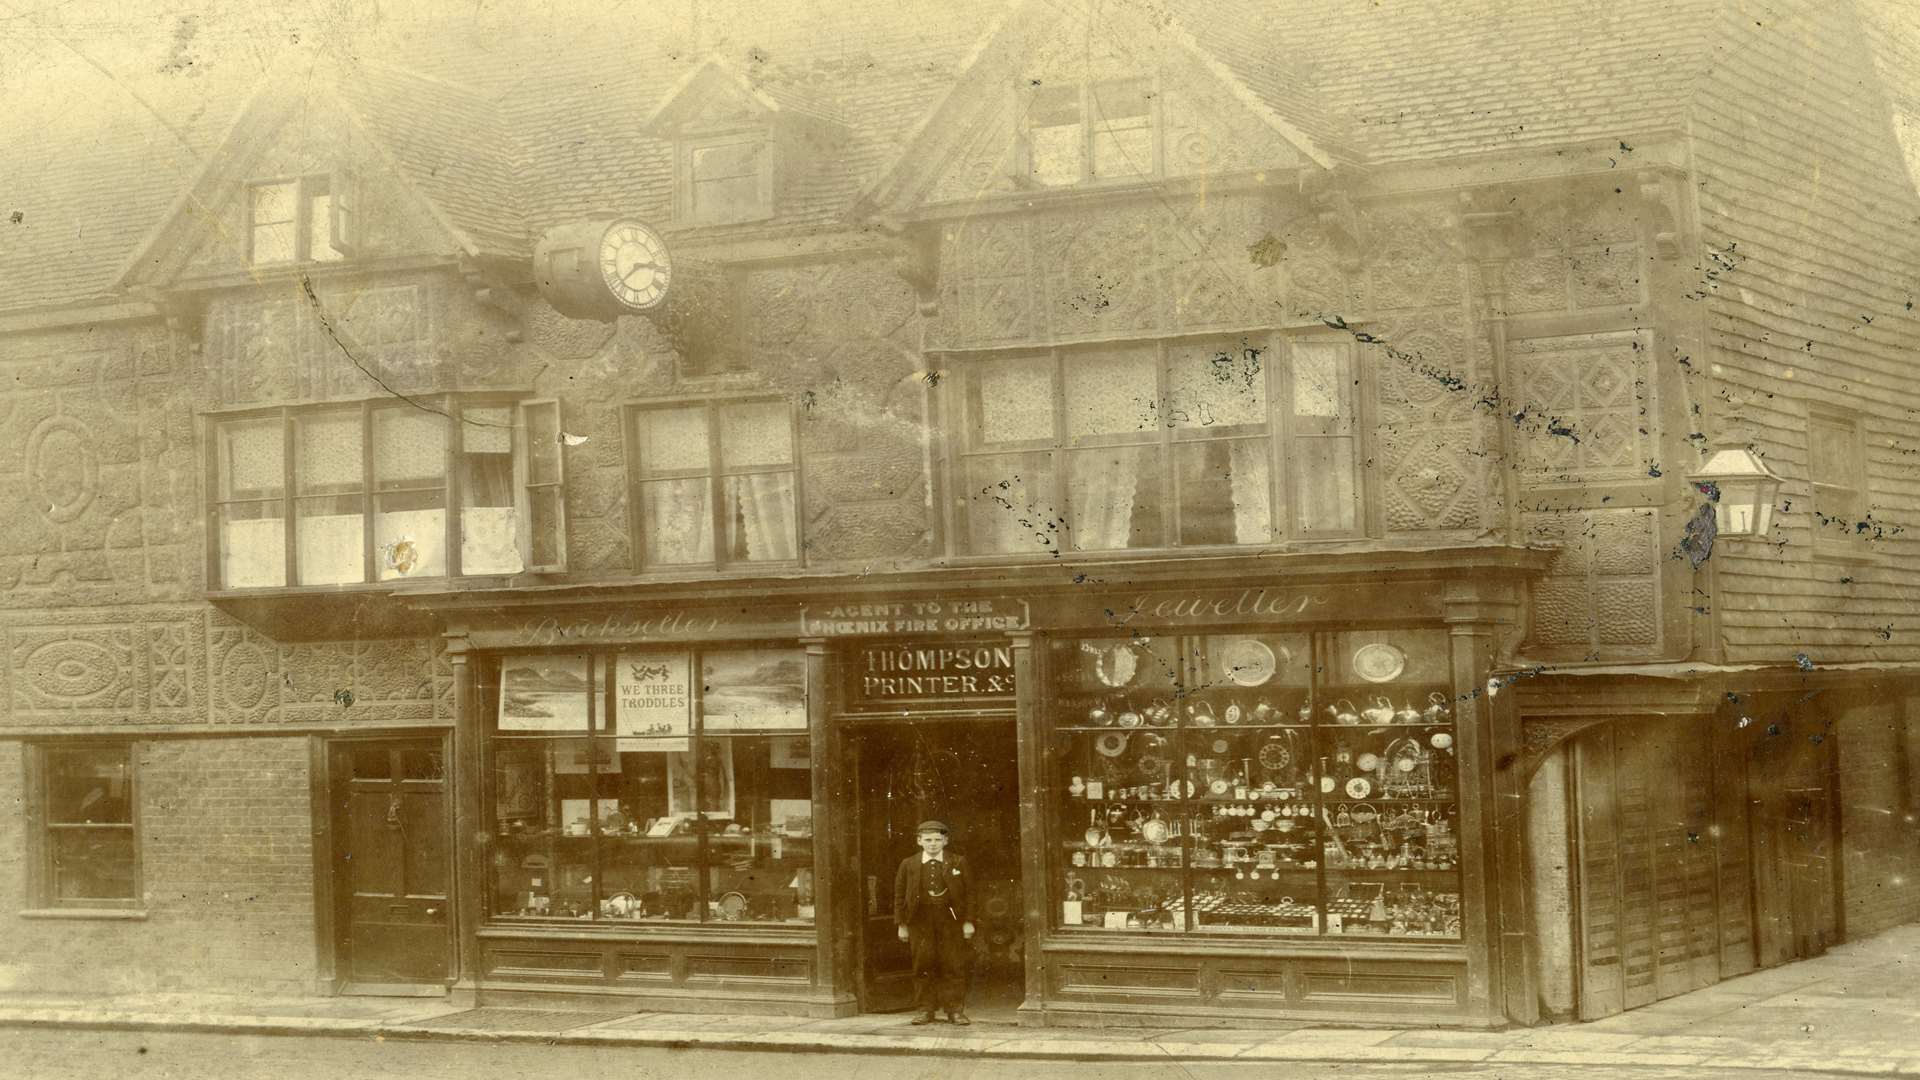 The building in the early 1900s